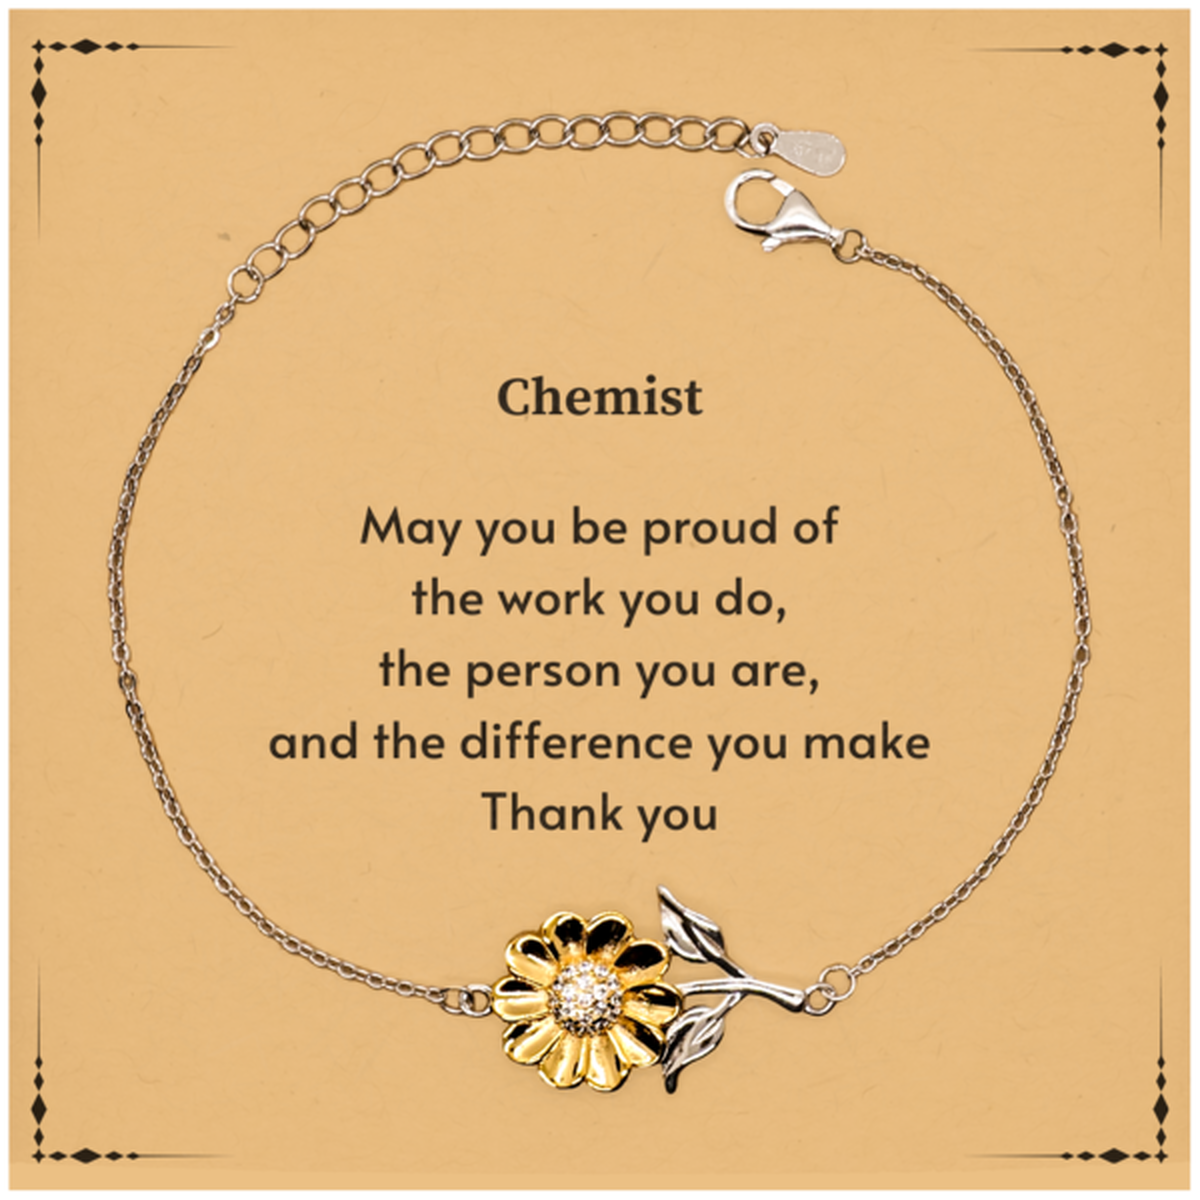 Heartwarming Sunflower Bracelet Retirement Coworkers Gifts for Chemist, Chemist May You be proud of the work you do, the person you are Gifts for Boss Men Women Friends